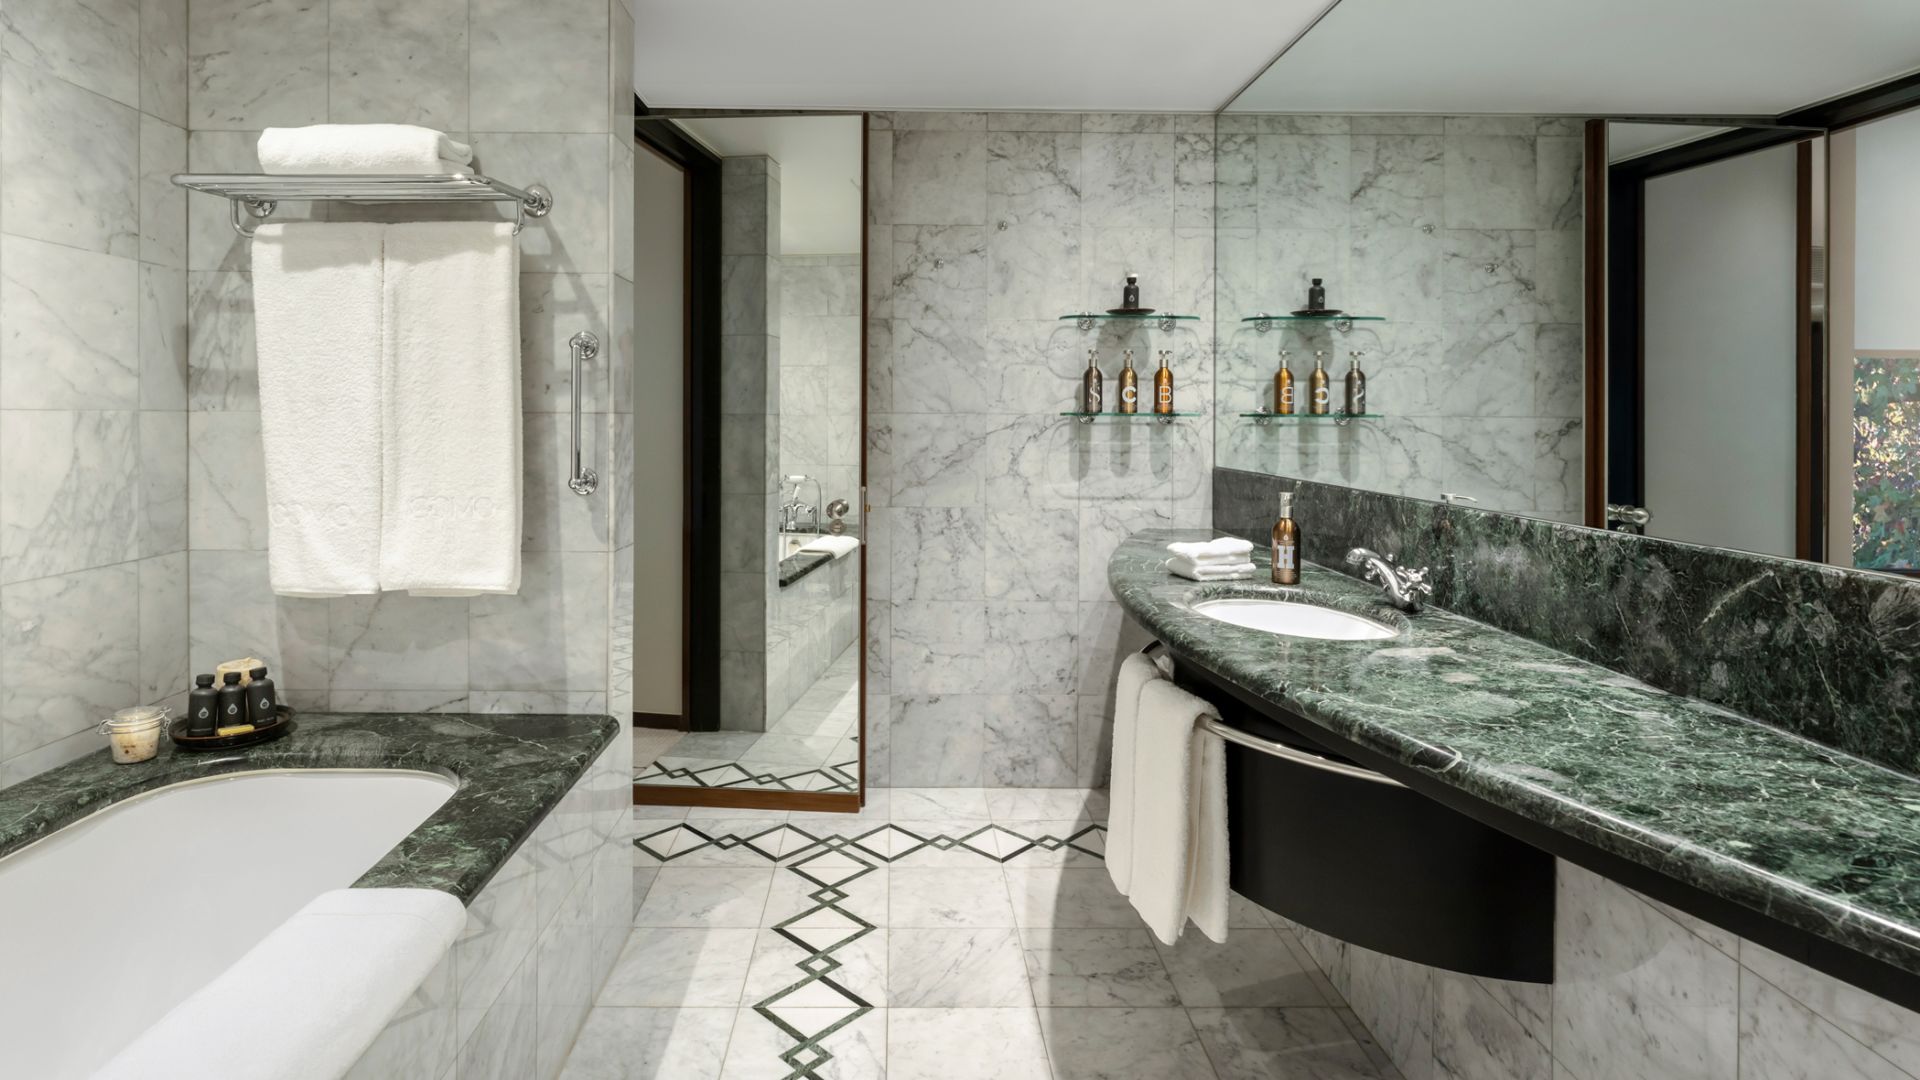 A Bathroom With A Marble Countertop - Image